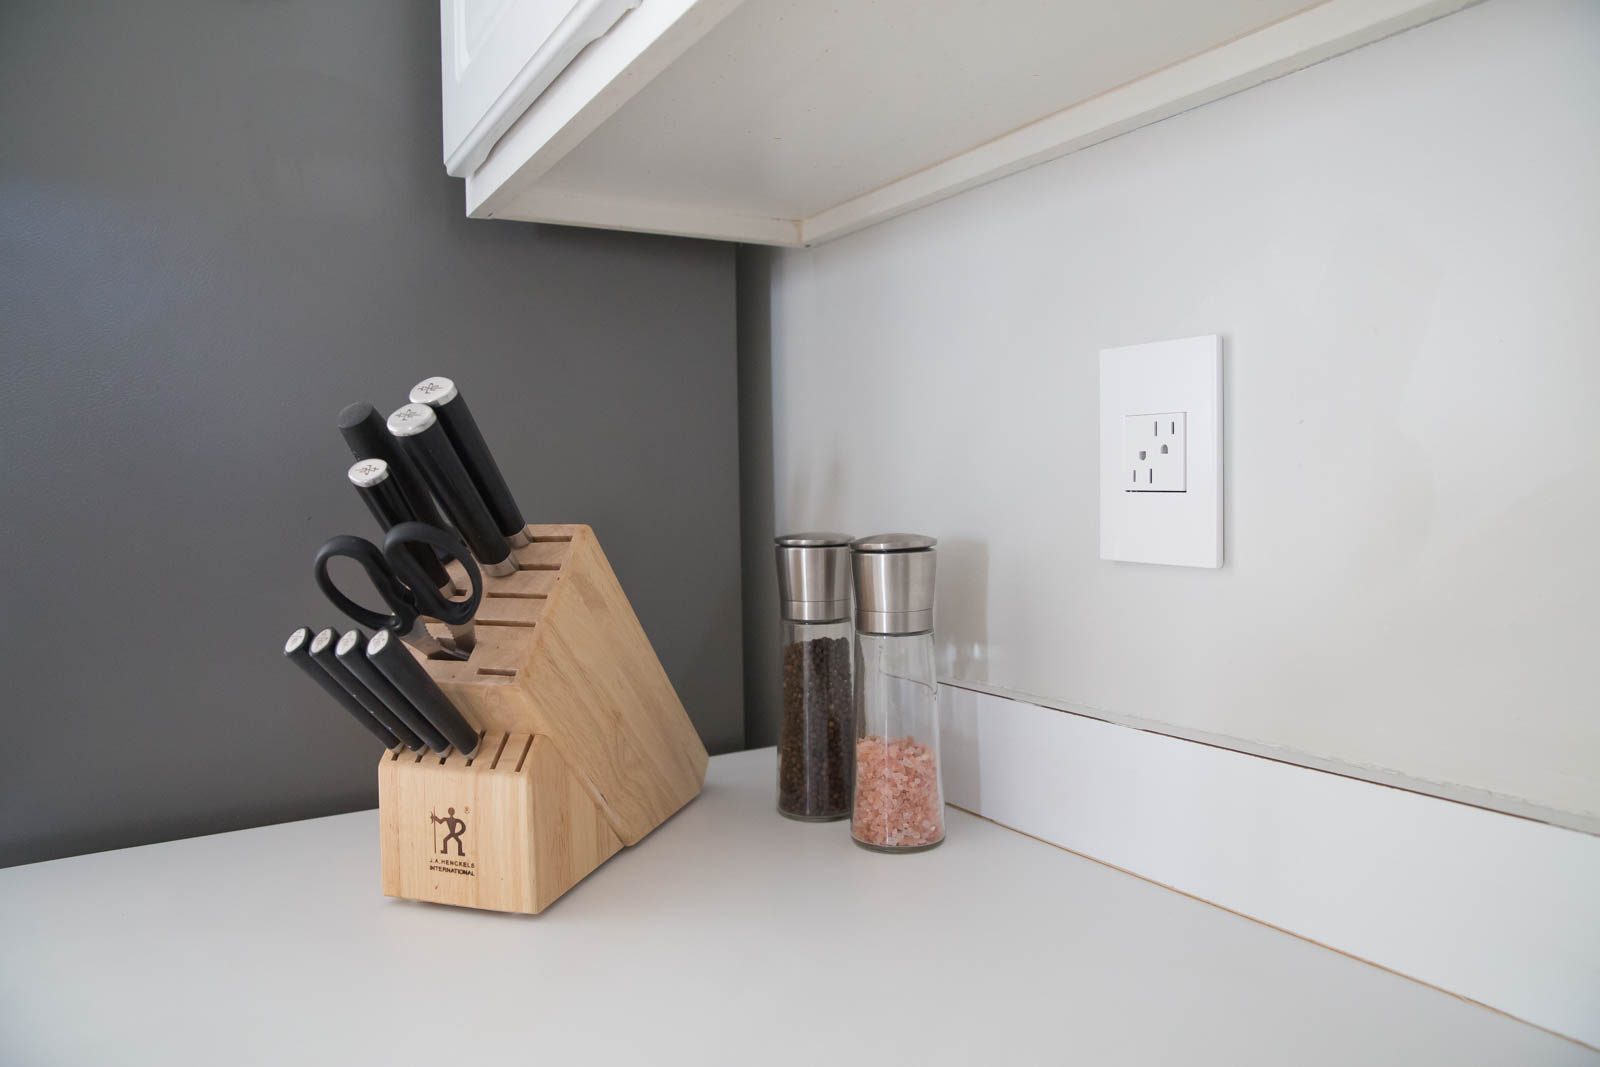 Nursery Finishing Touches with Legrand Adorne Collection | Brushed Brass Wall Plate | Wi-FI Outlet | USB Outlet | Innovative Lighting Controls & Charging Solutions | via @maeamor